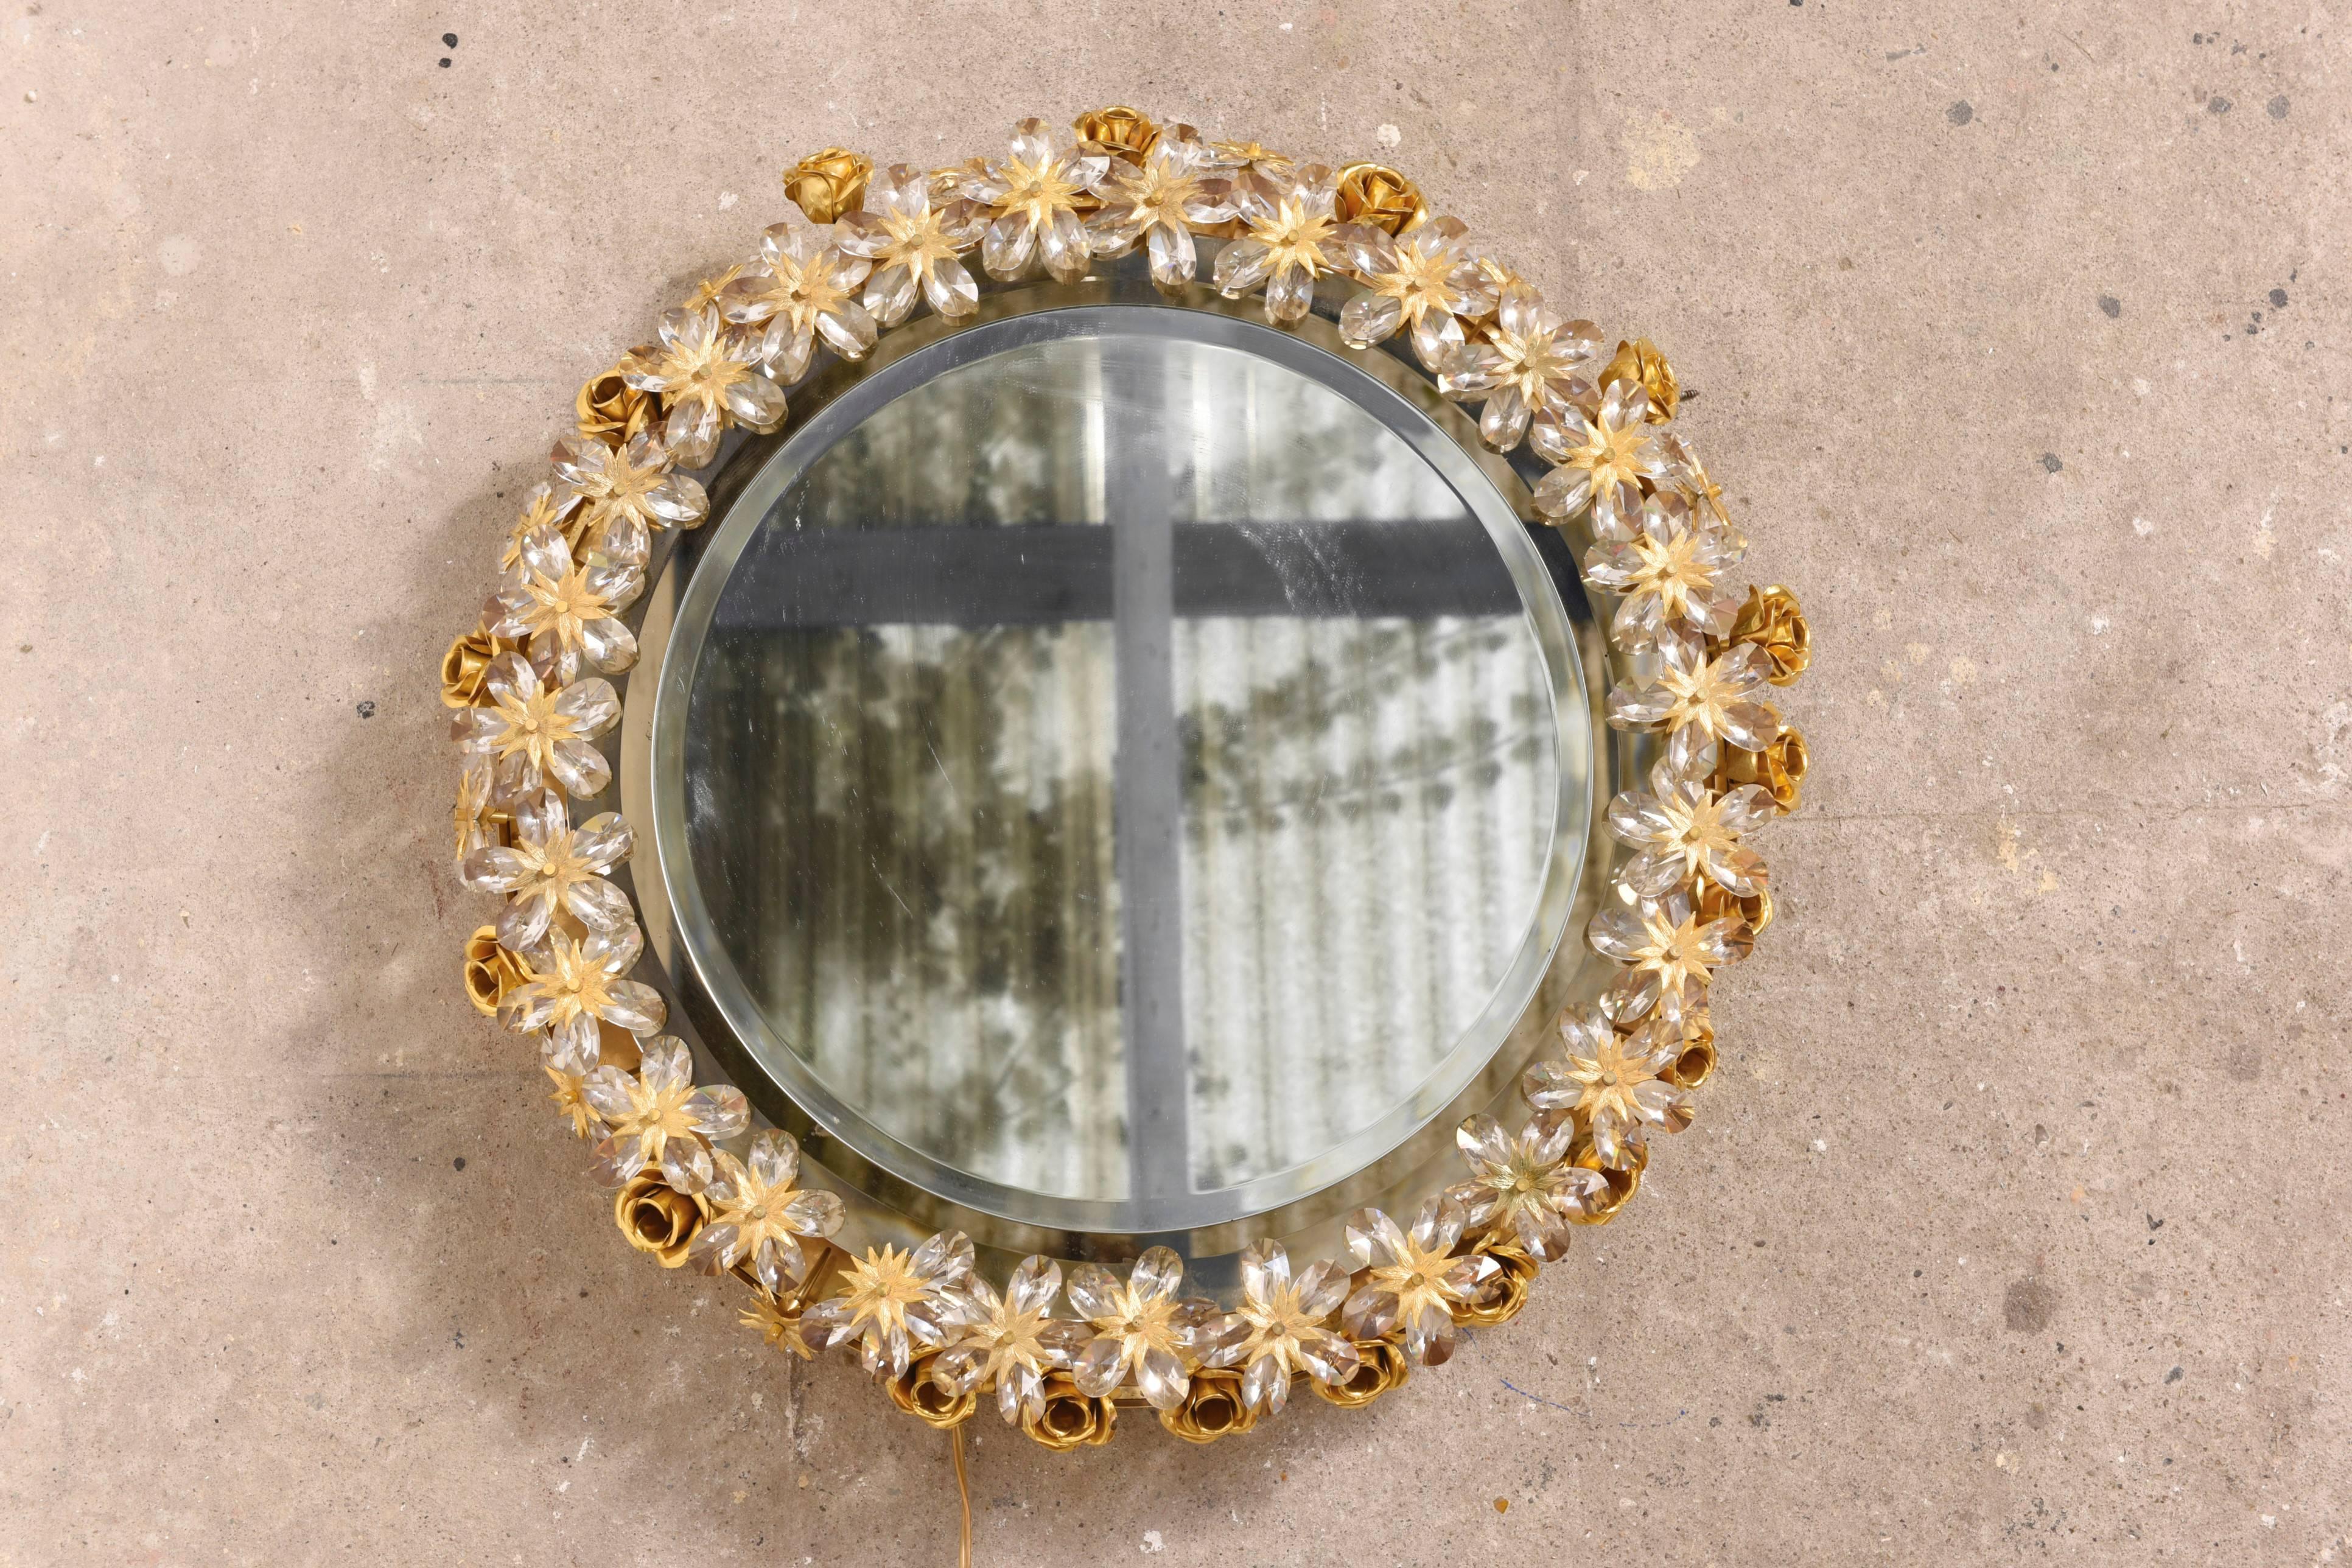 Magnificent brass backlit mirror by Palwa.
 
The large individual flower jewel-like faceted crystals placed in a subtle brass circle encompassing the mirror with a tier of gilded roses. 

The illumination through the crystals creates a